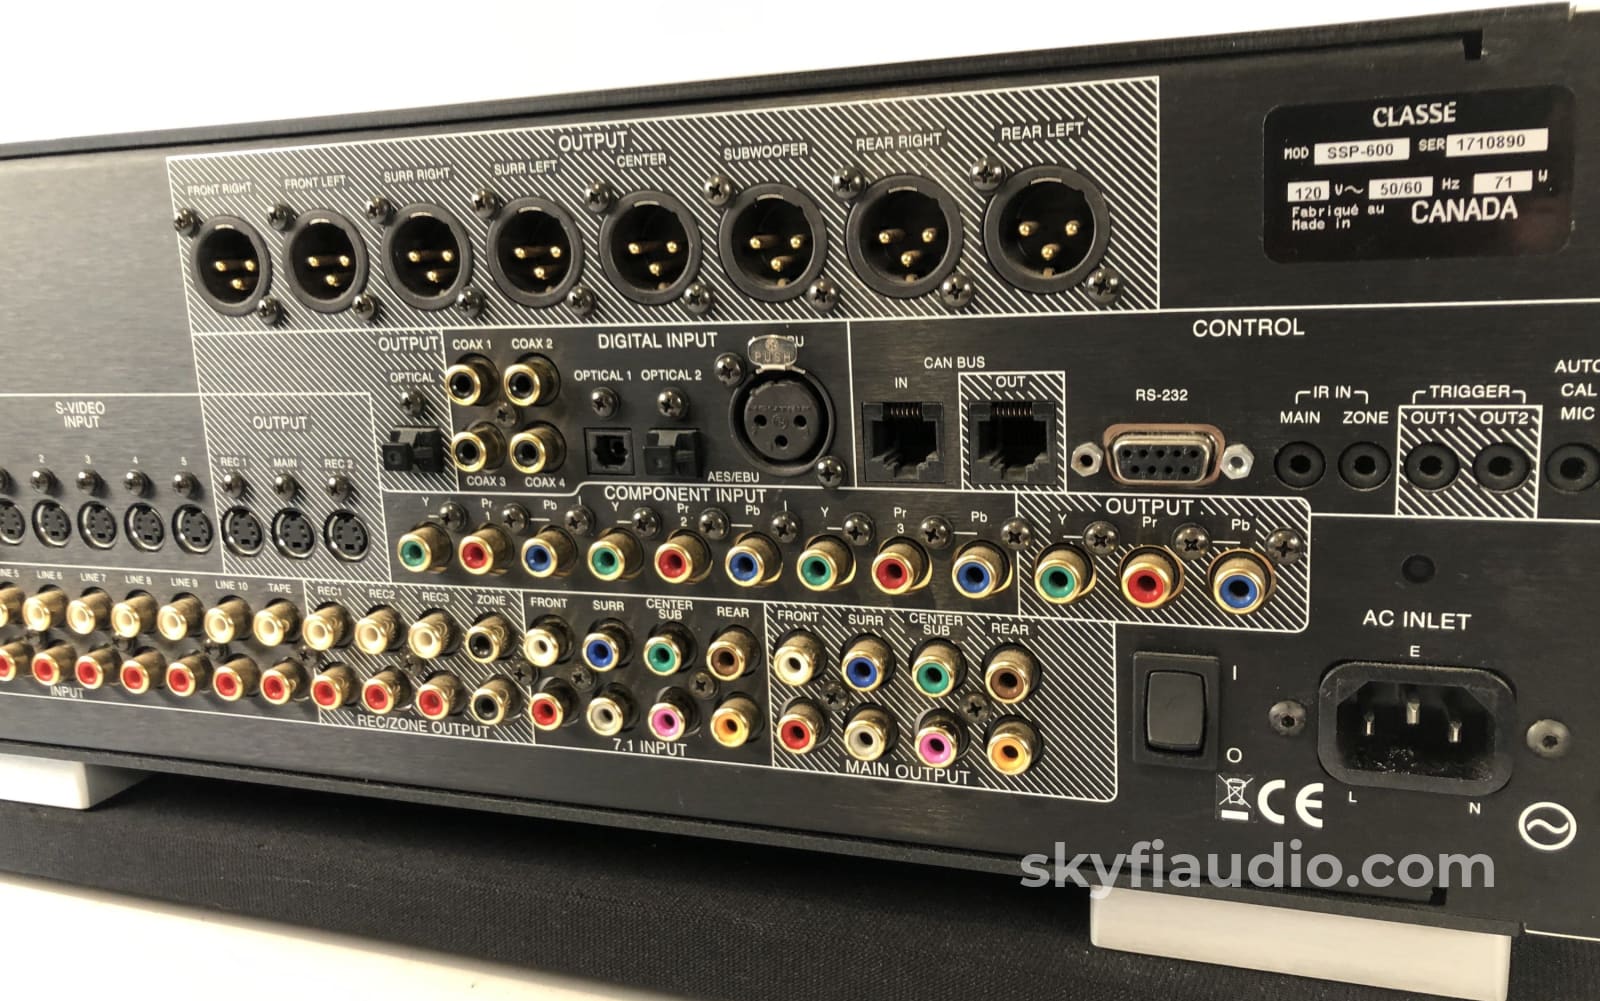 Classe Ssp-600 Theater Processor / Switchable Two Channel Preamp Preamplifier